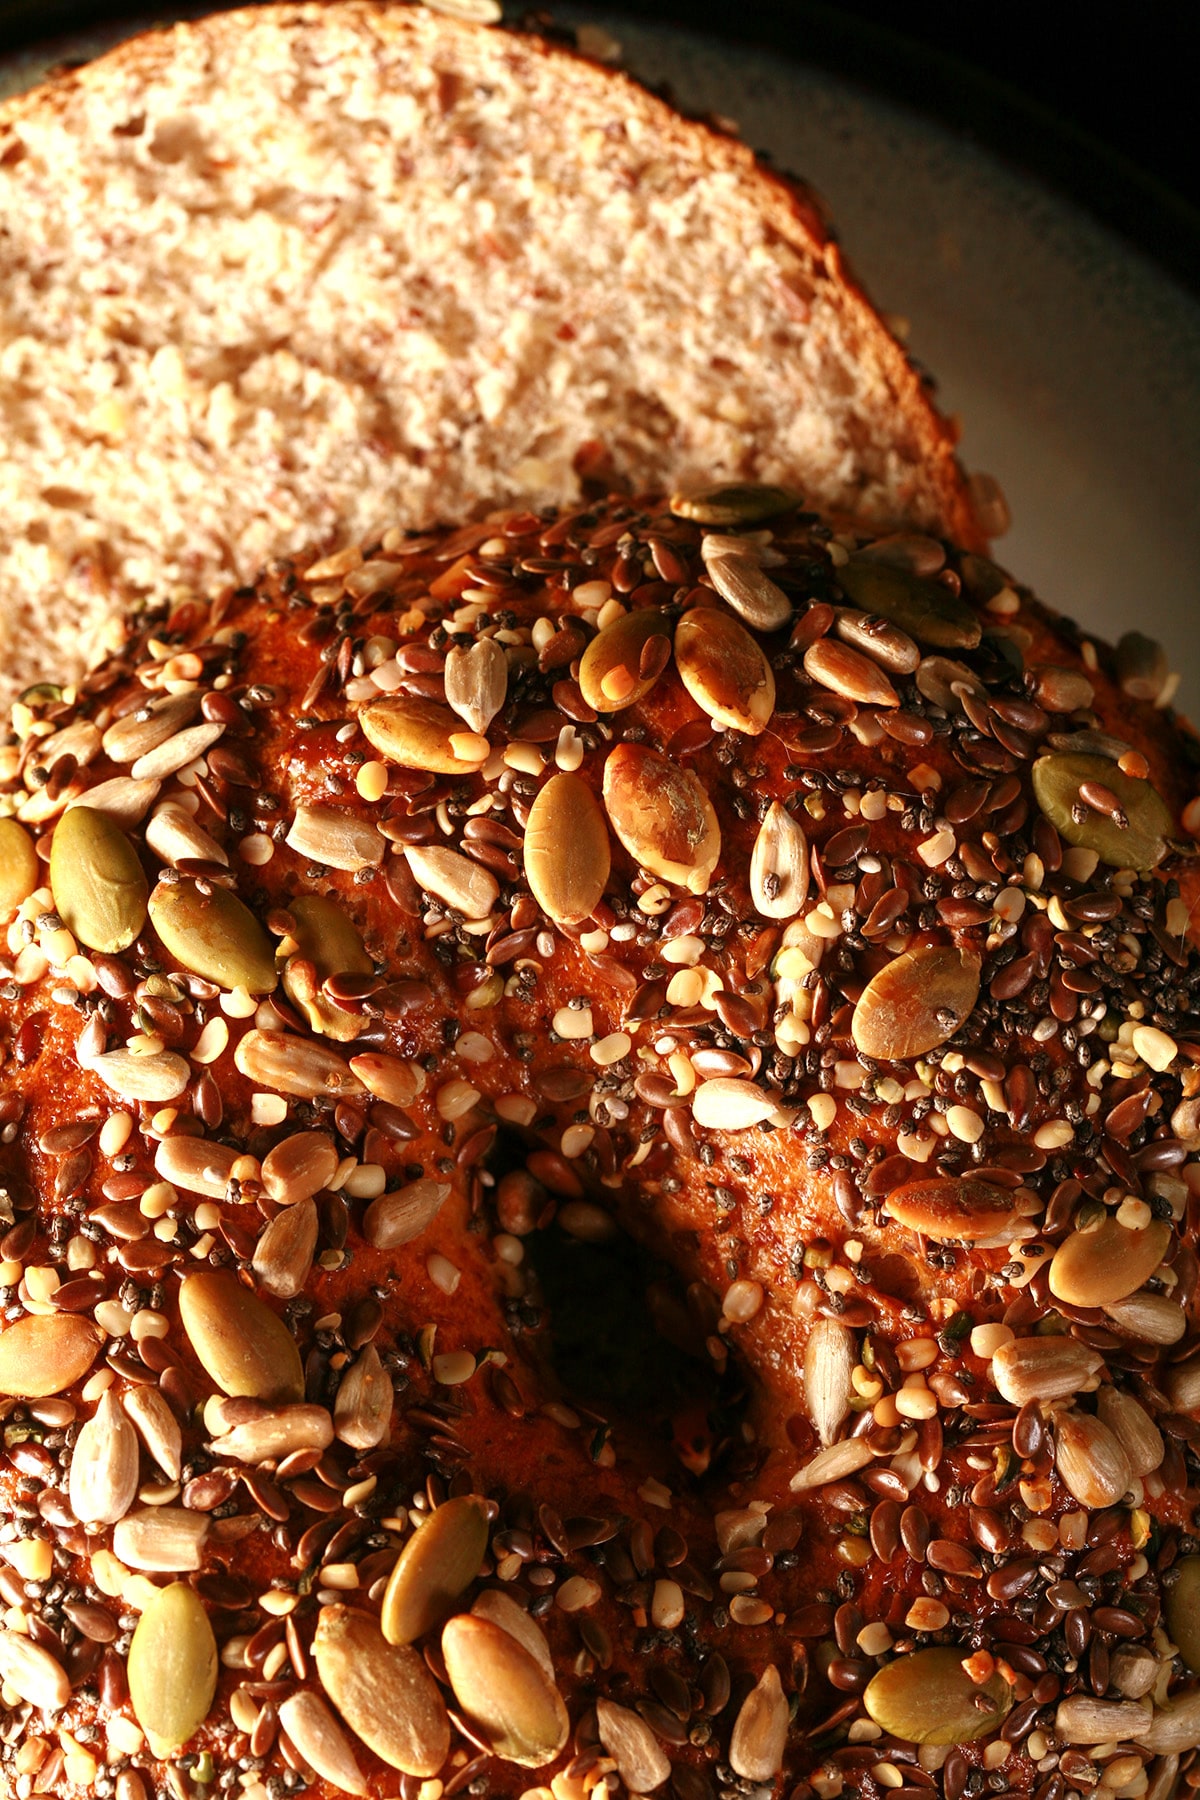 A whole wheat and flax bagel, sliced and served on a small plate. The top side of the bagel is covered in a mix of seeds - pumpkin, sunflower, sesame, chia, and poppy.